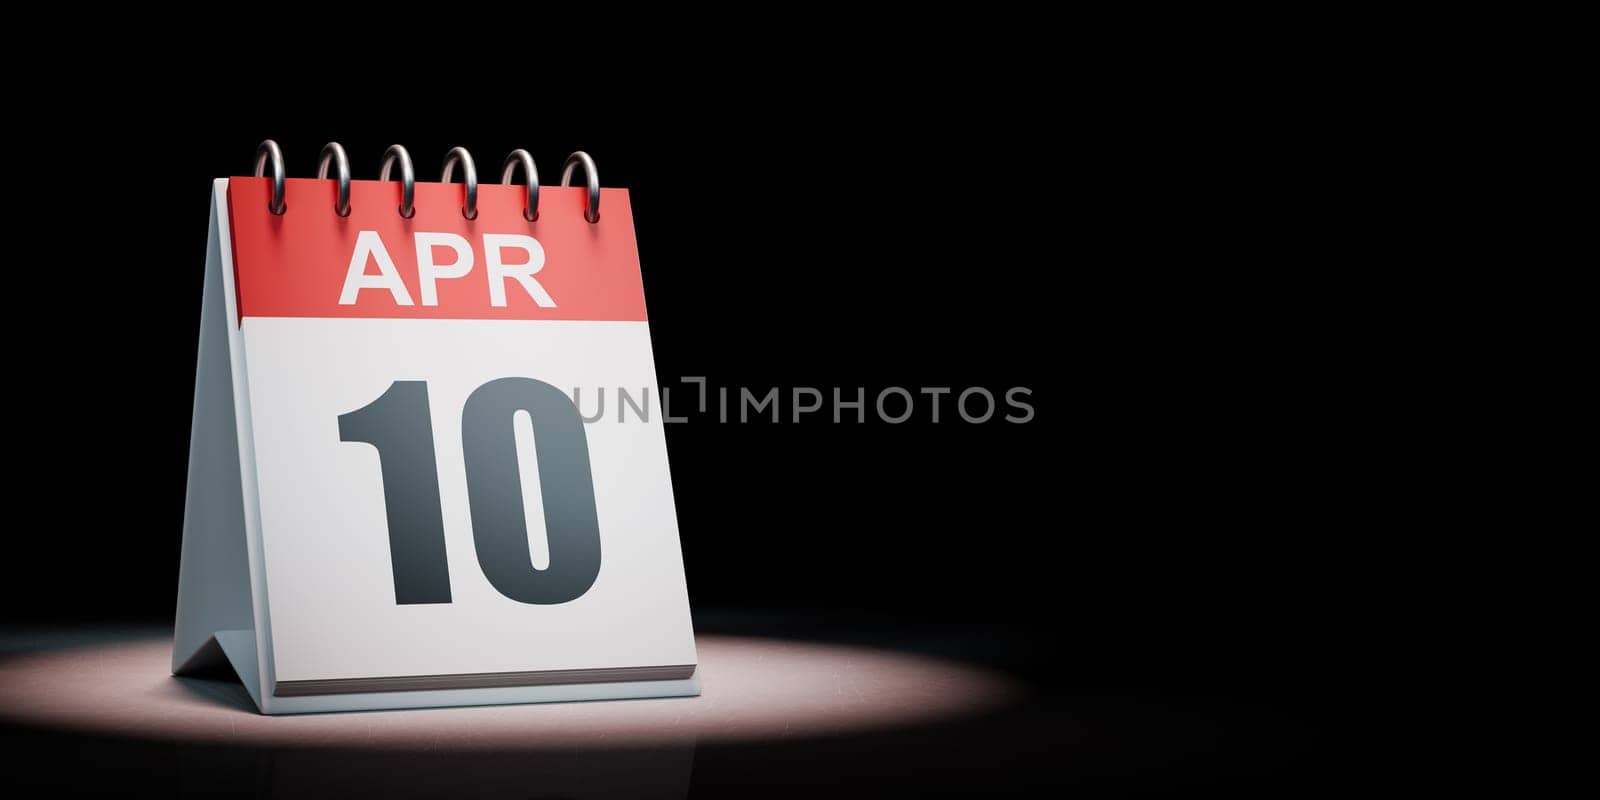 Red and White April 10 Desk Calendar Spotlighted on Black Background with Copy Space 3D Illustration